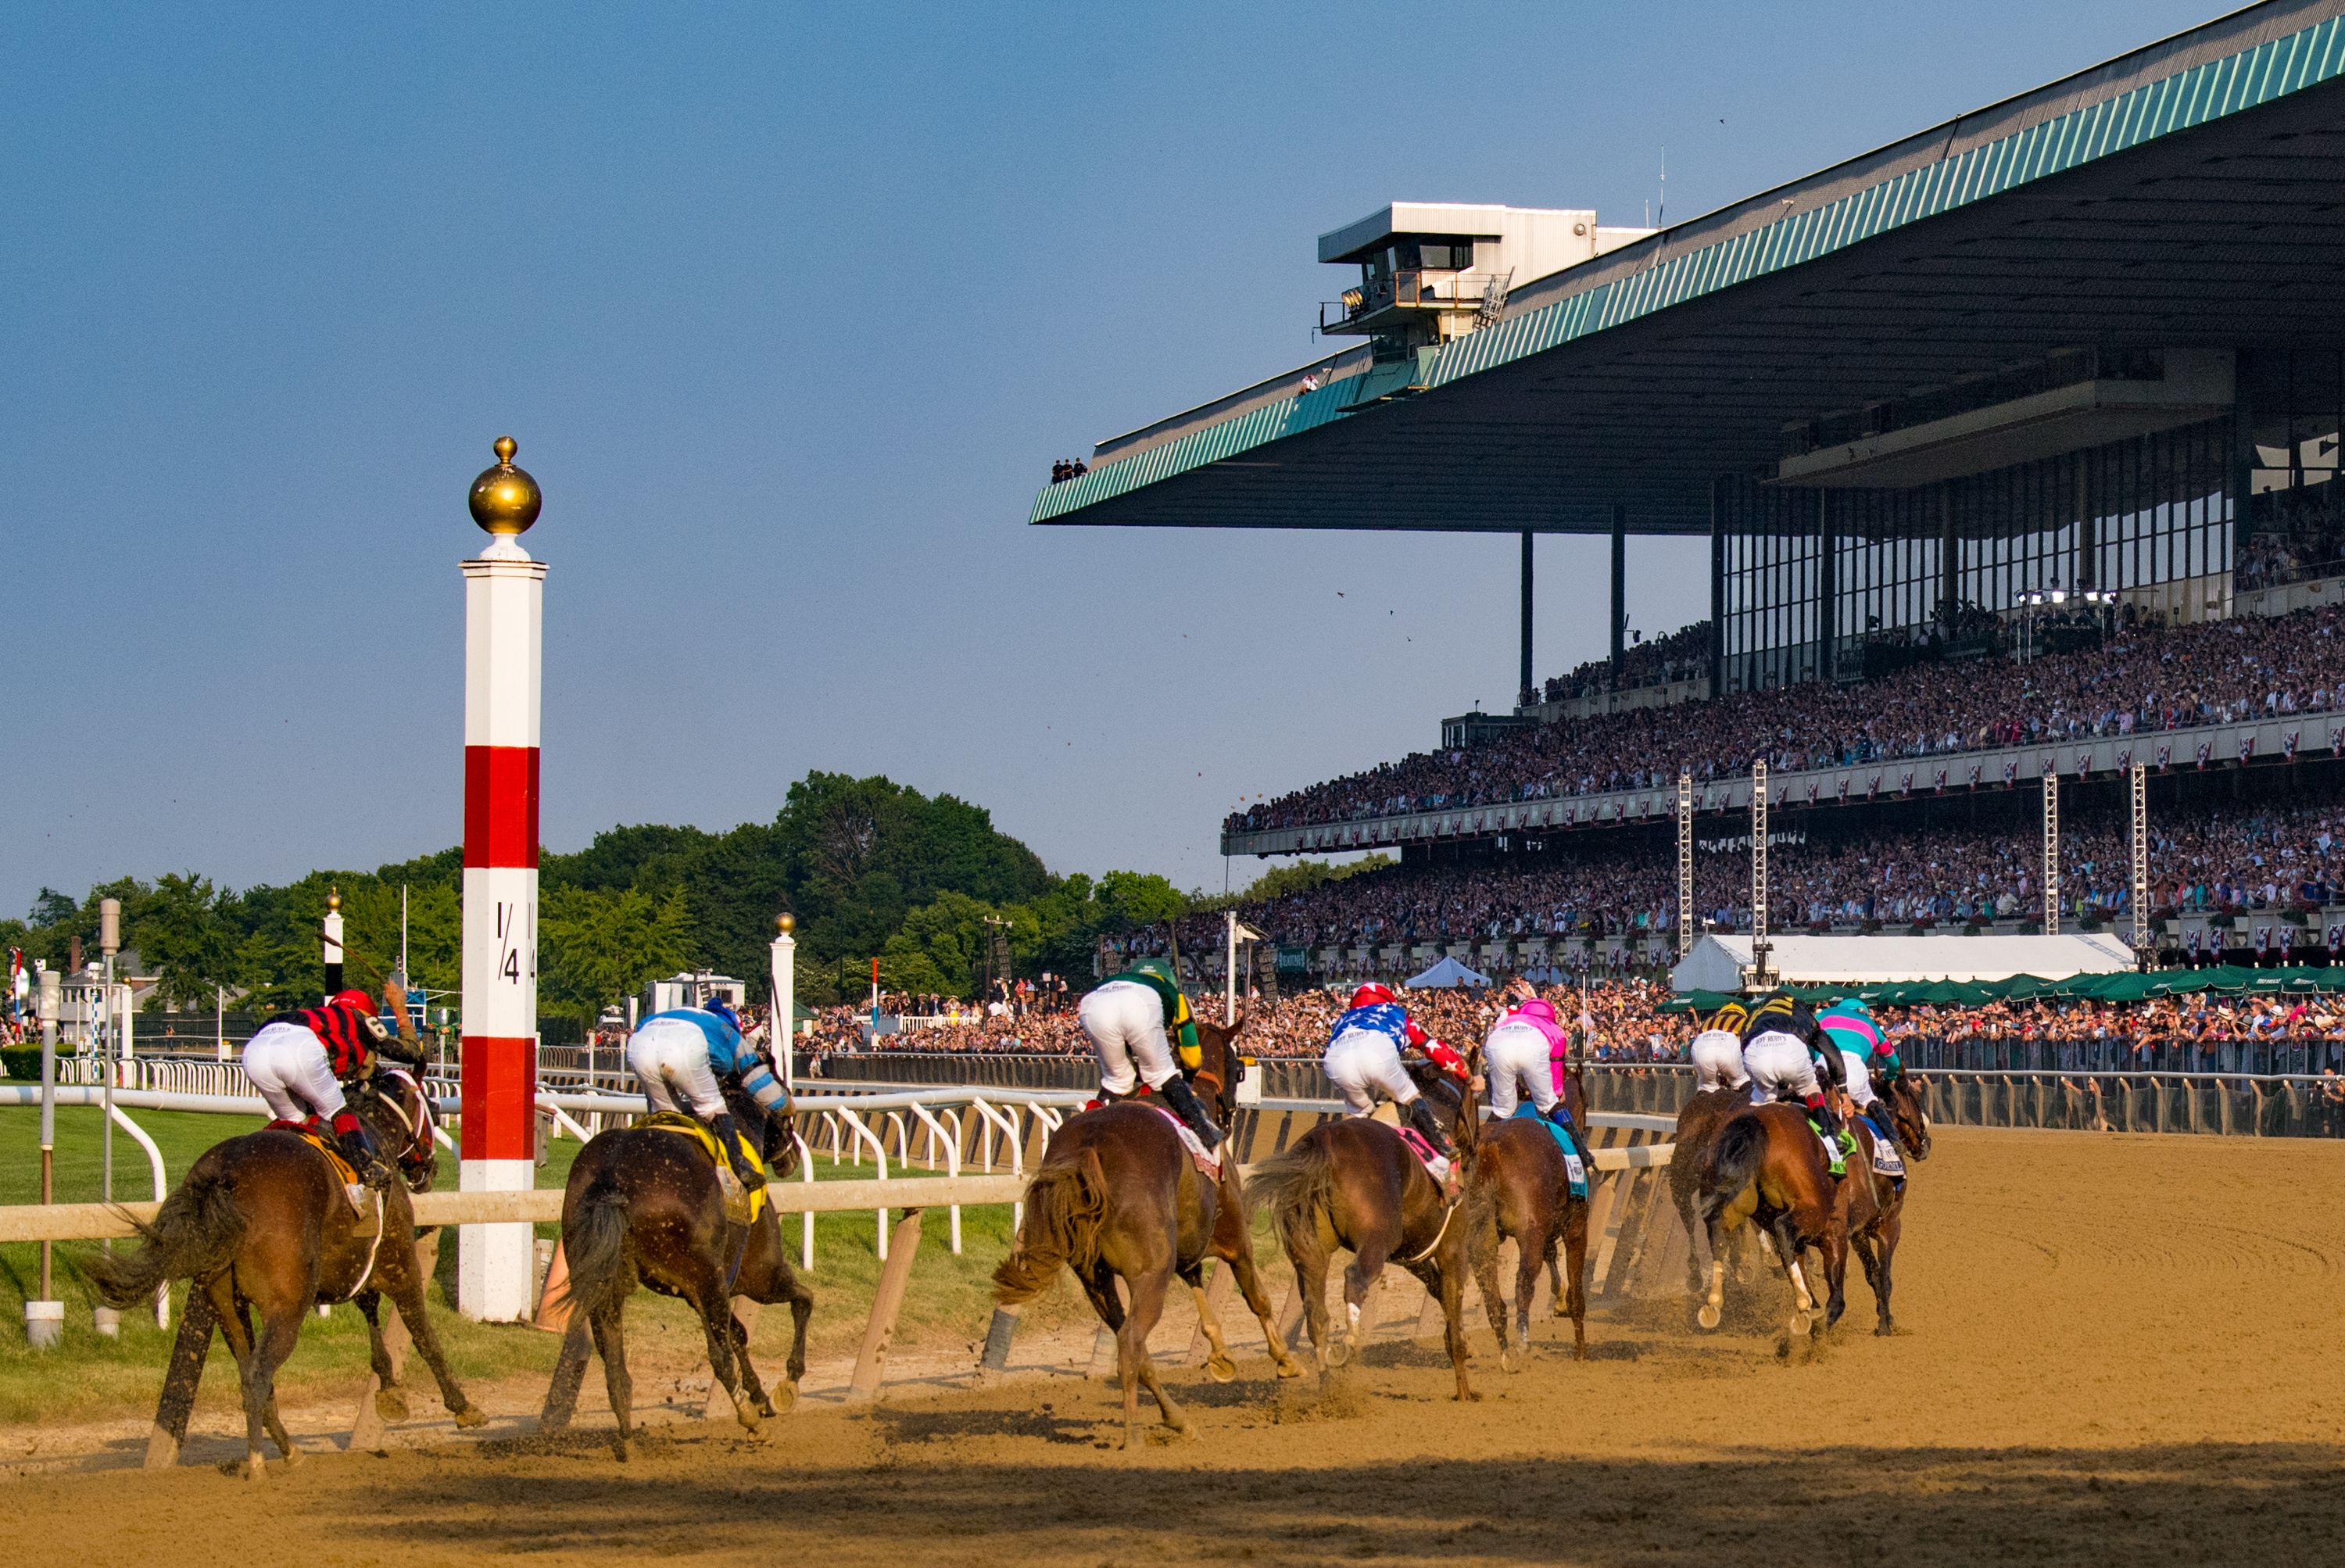 Horses make turn 4 during The 149th running of the Belmont Stakes at Belmont Park on June 10, 2017 in Elmont, New York.. (Photo by B51/MarkABrown/Getty Images) *** Local Caption ***